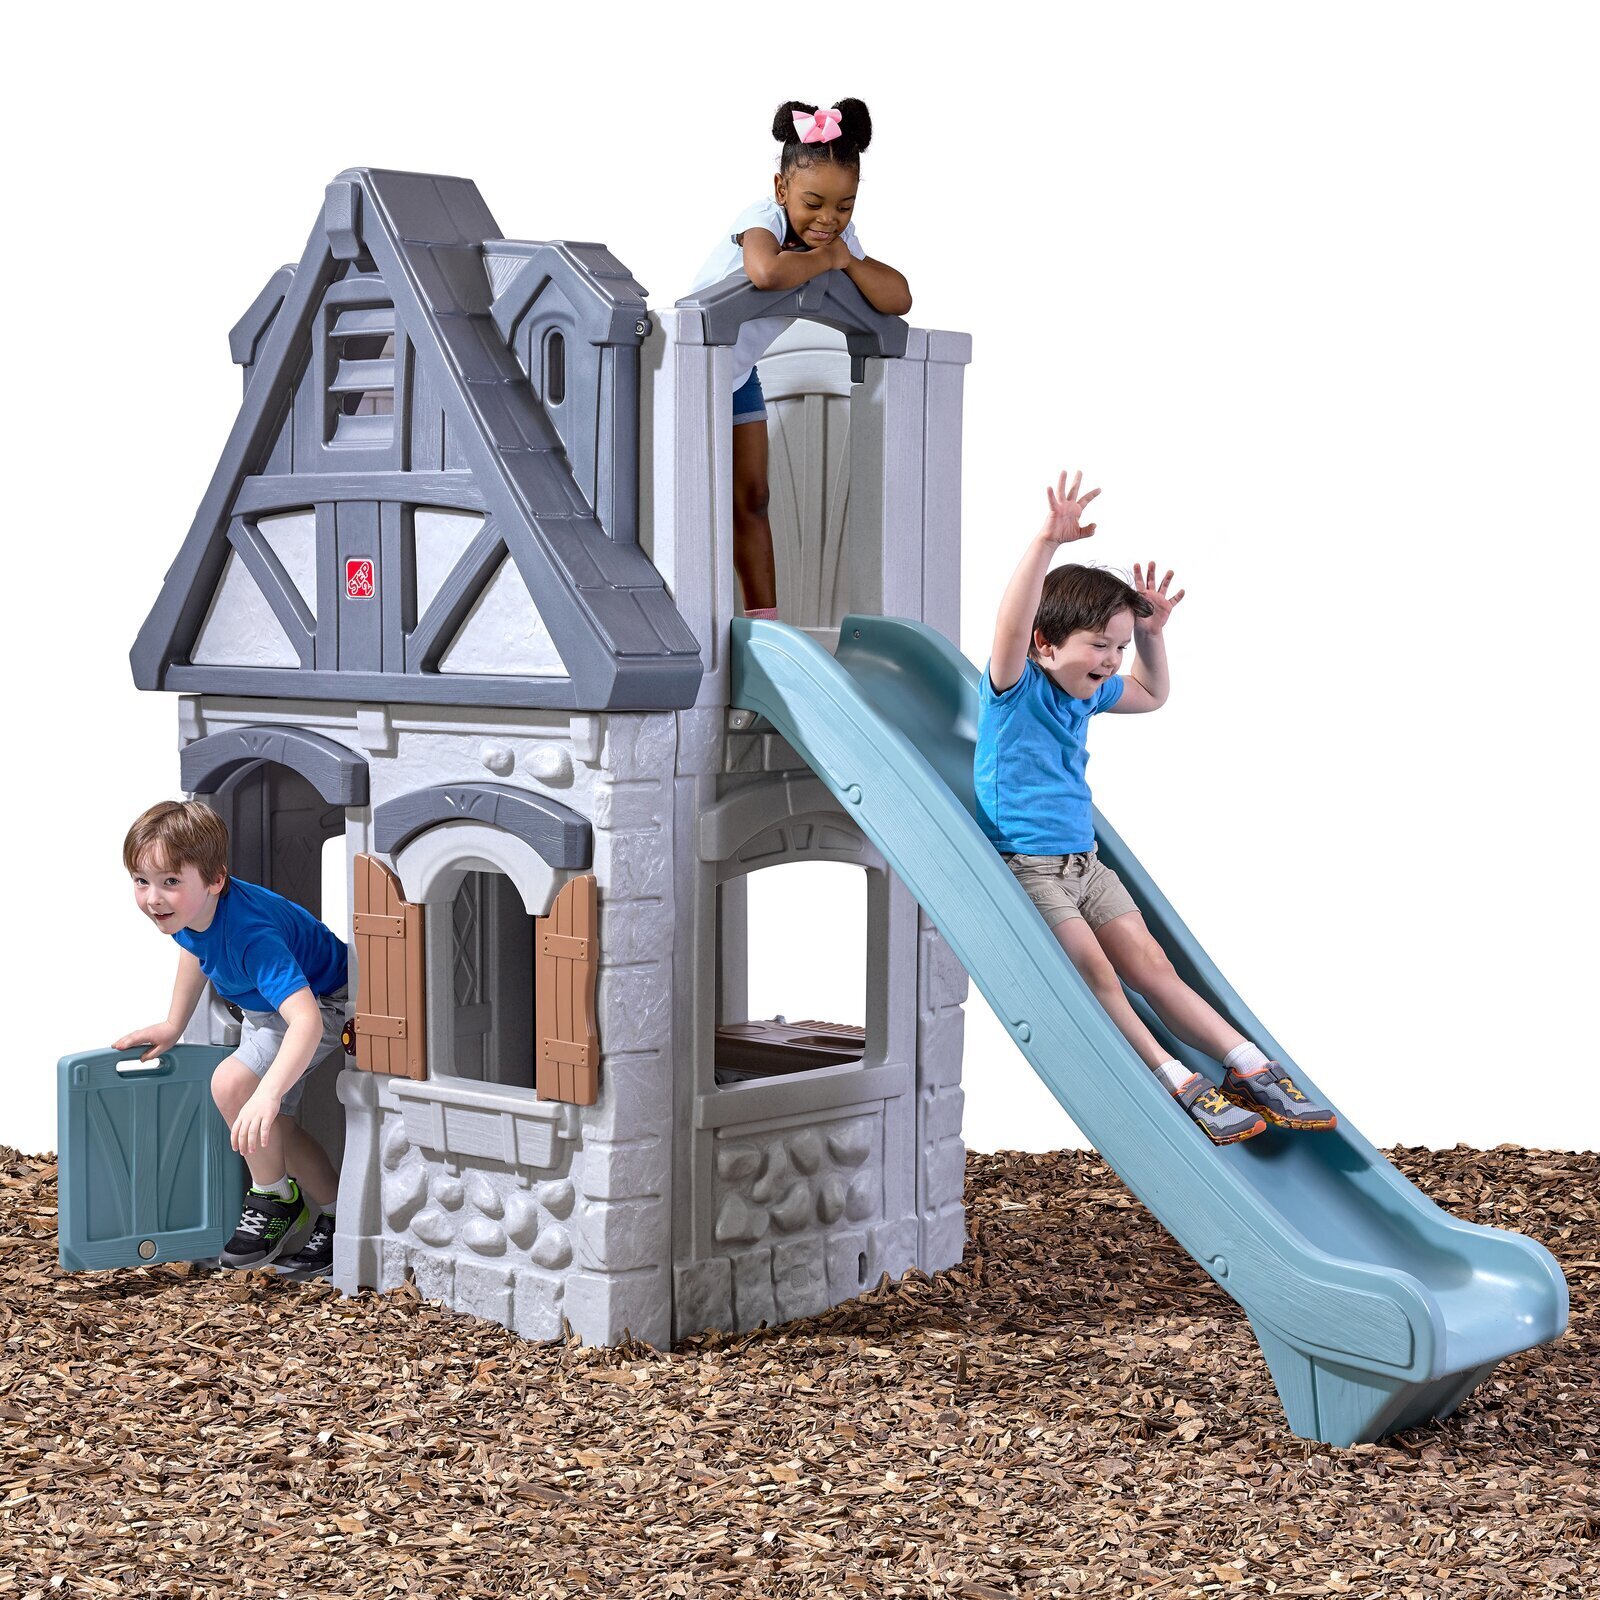 Two Story Indoor Playhouse With Slide